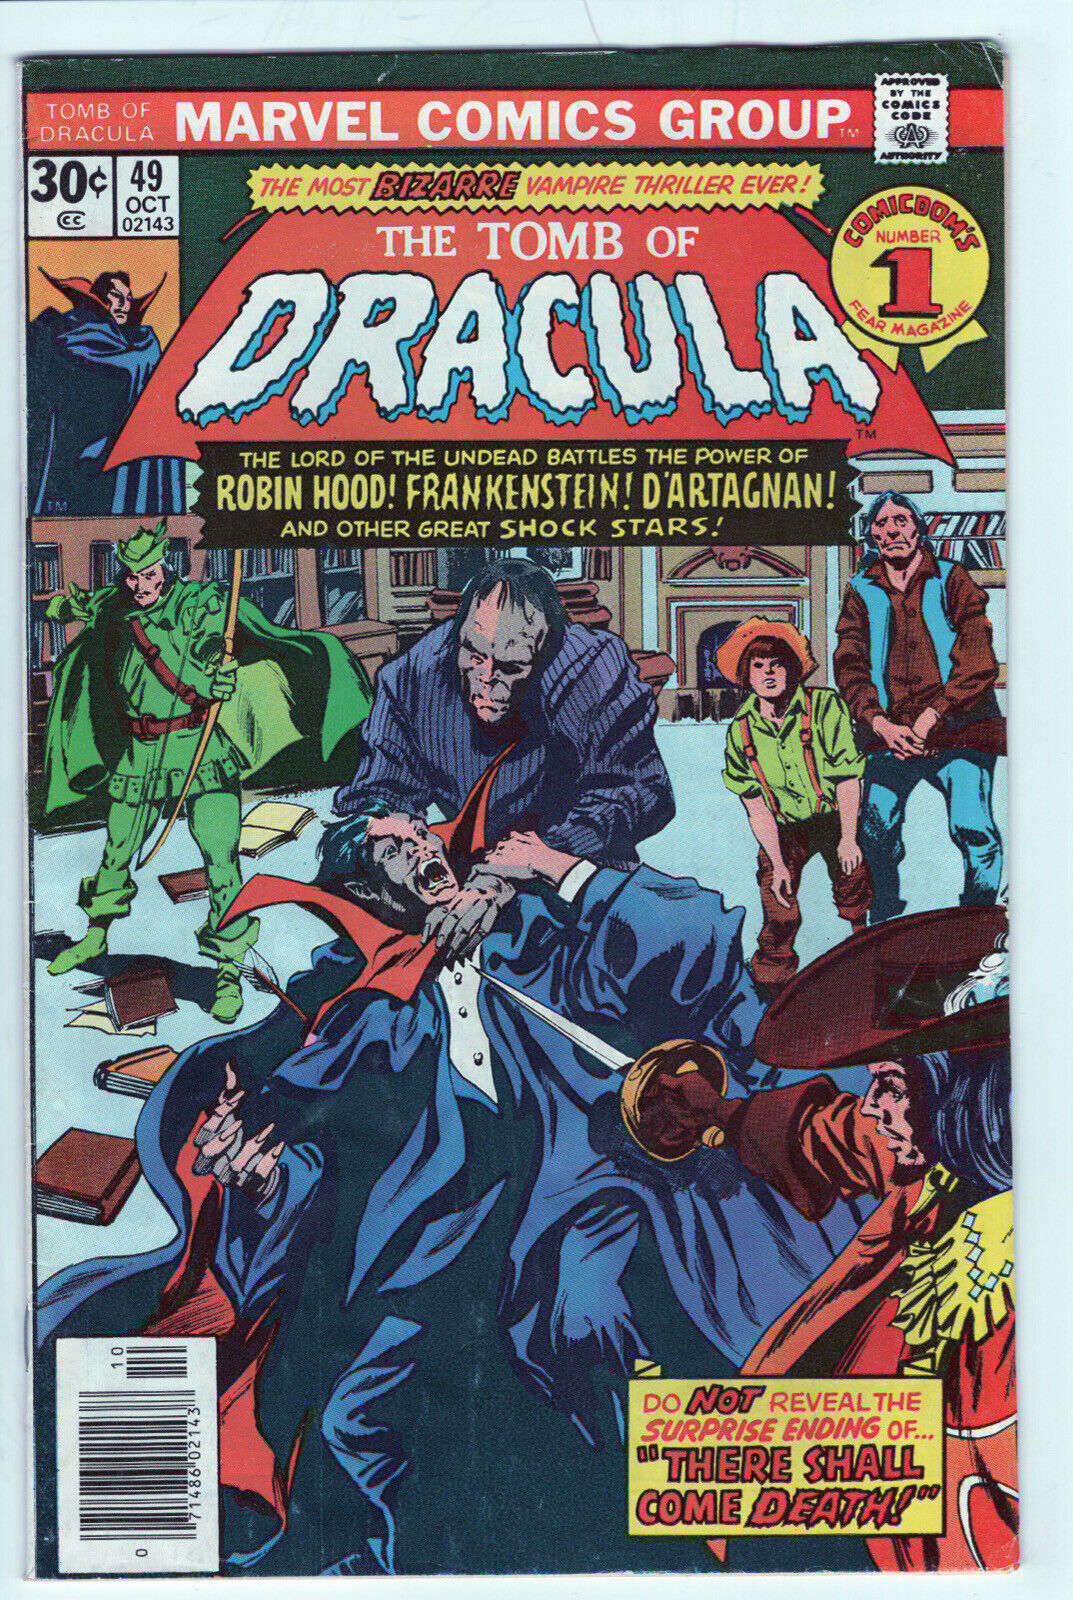 TOMB OF DRACULA #49 - 2.5 - OW-W